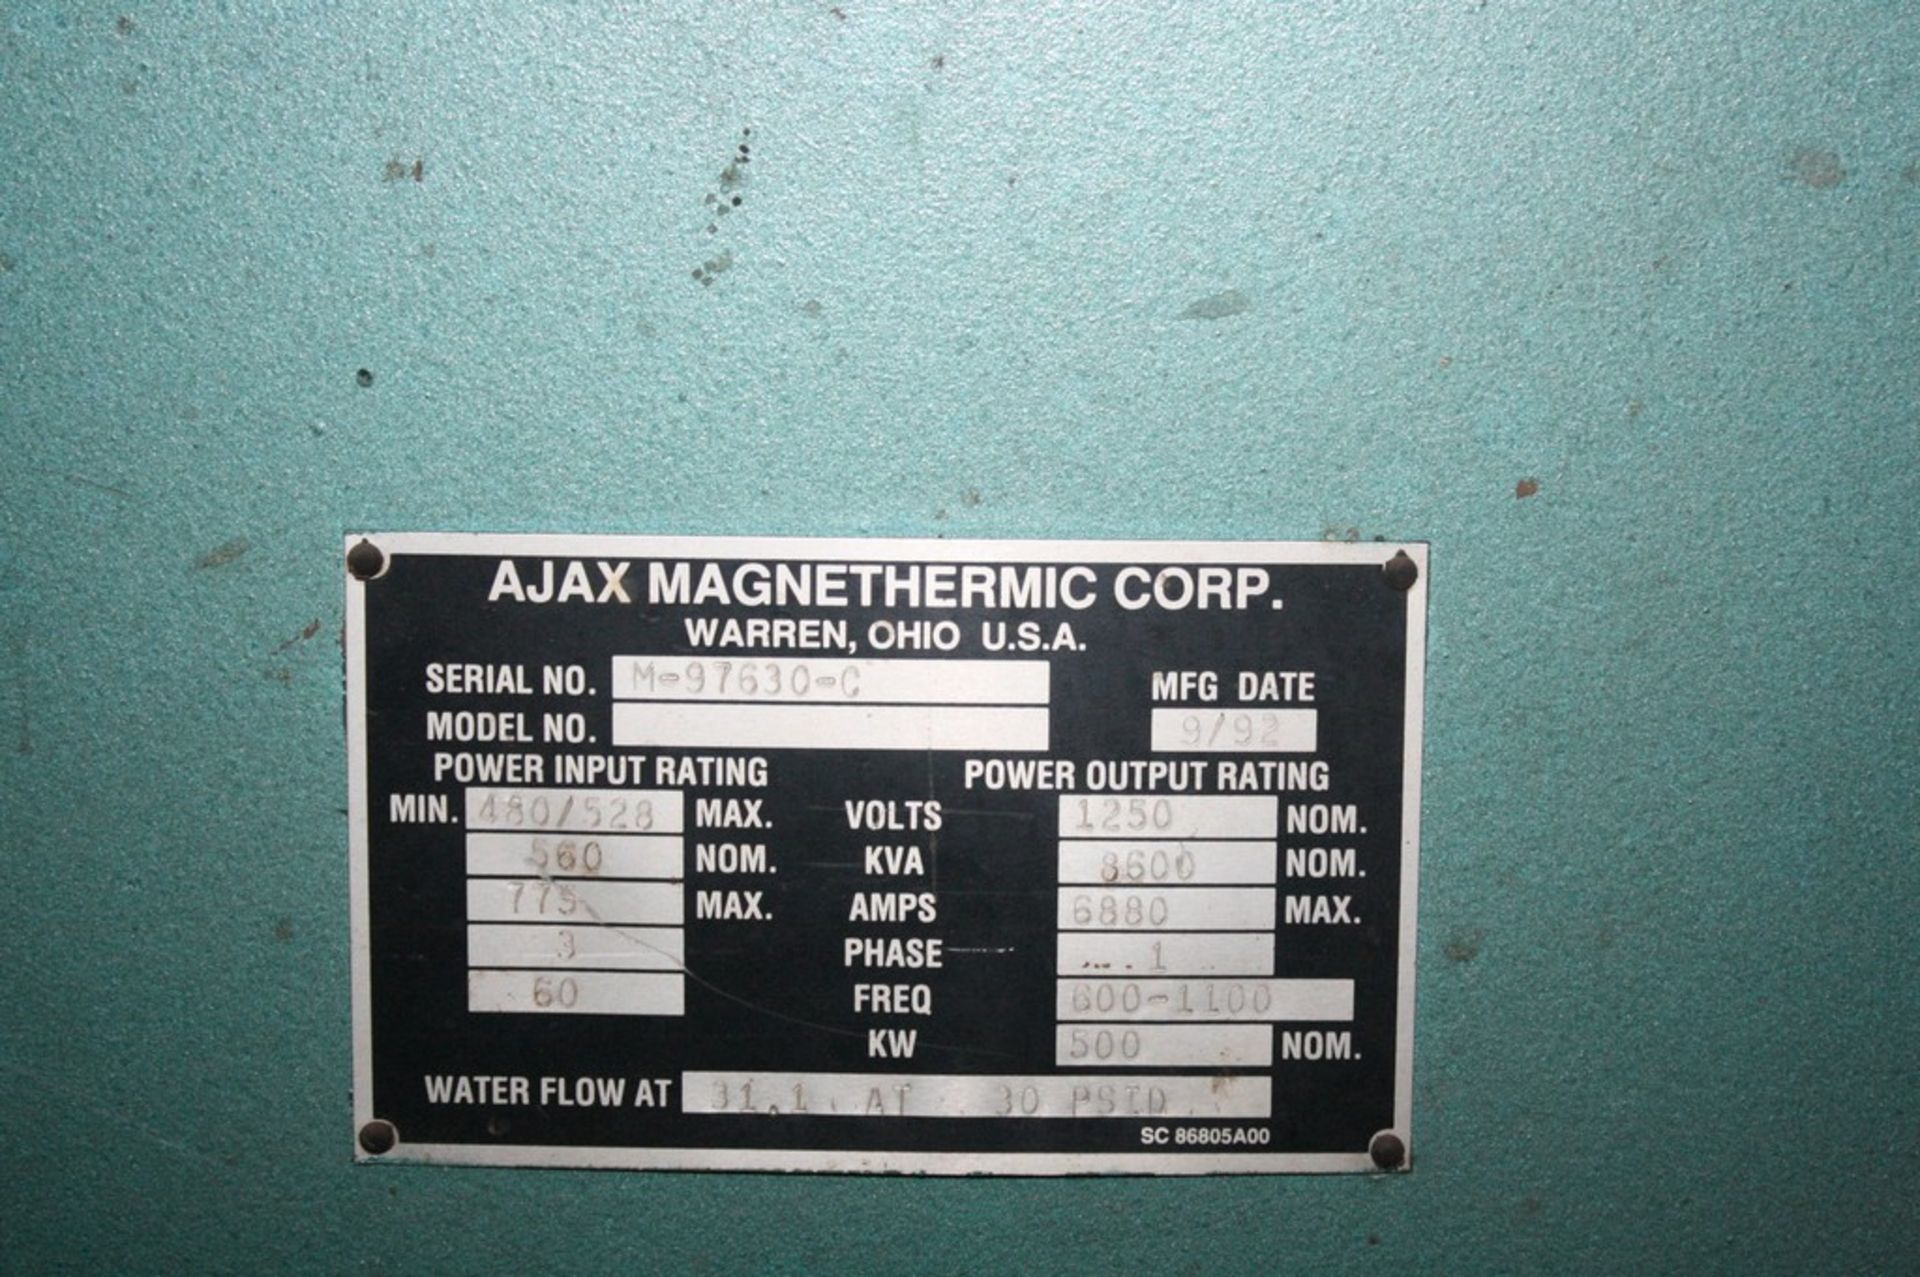 AJAX MAGNETHERMIC 500 KW 1 KHZ PACER INTEGRAL FIBEROPTIC POWER SUPPLY S/N M-97630-C W/1-TON AND 1/ - Image 4 of 6